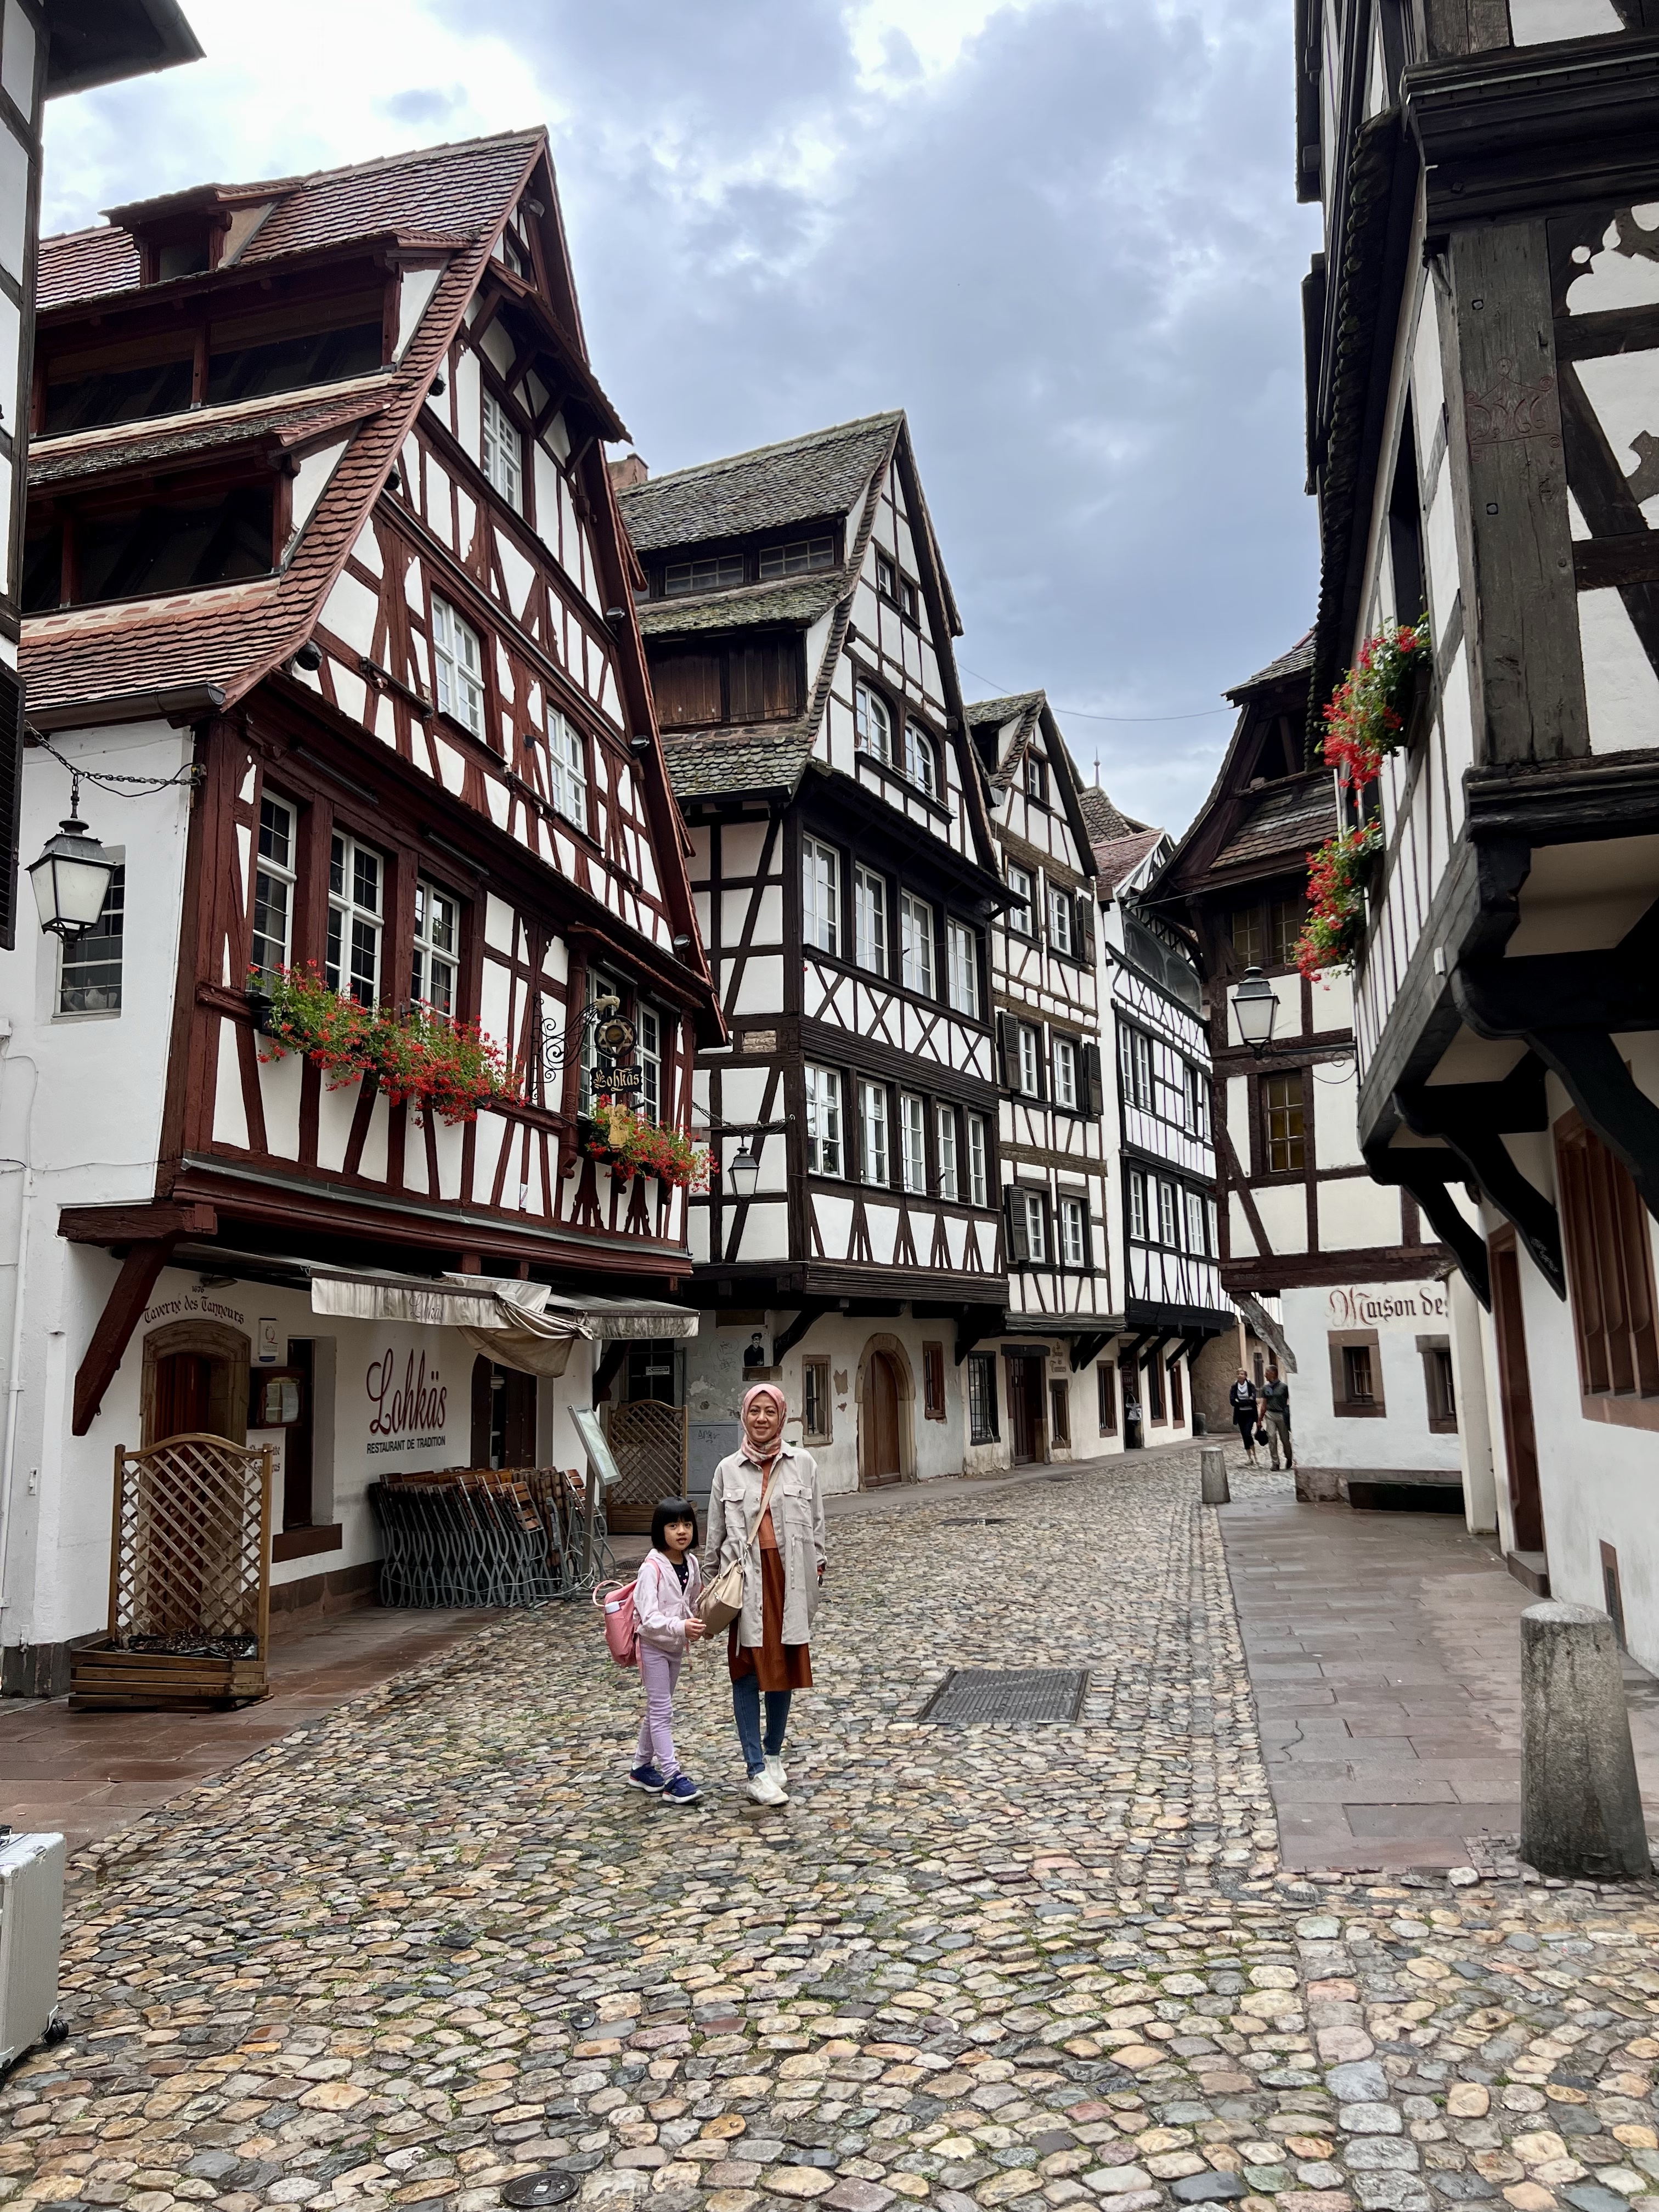 Be charmed with Strasbourg